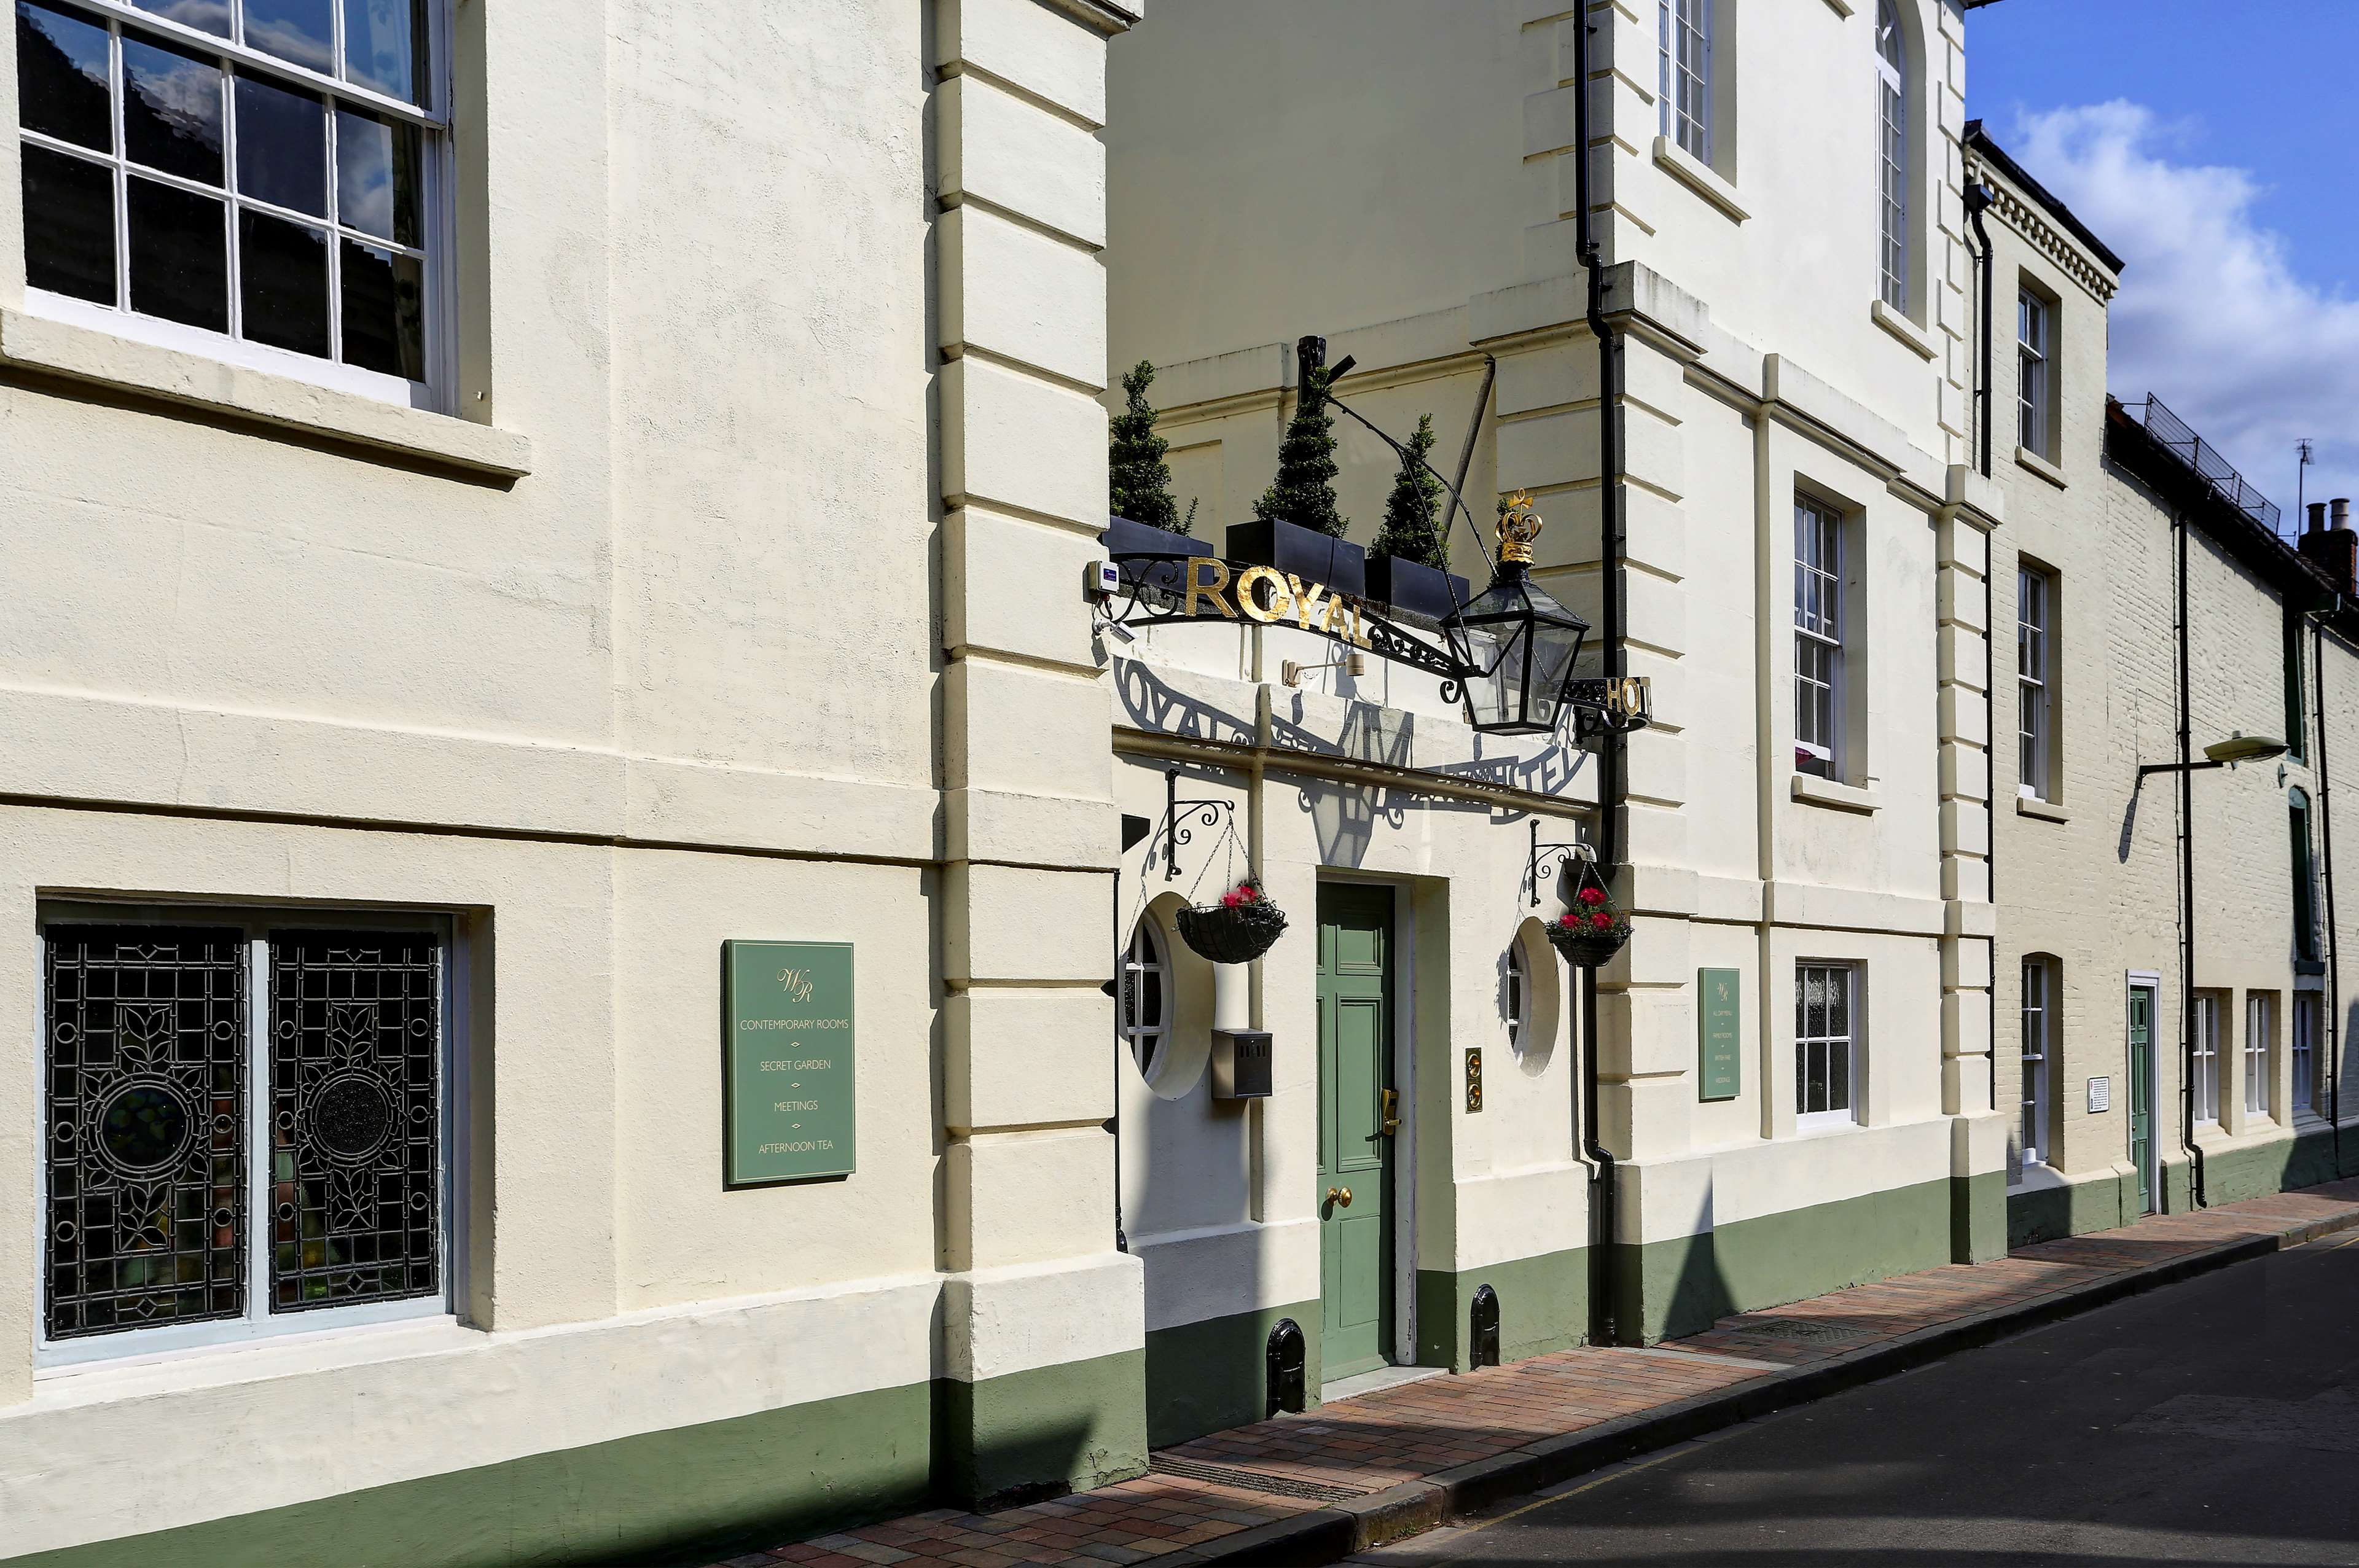 winchester royal hotel hampshire